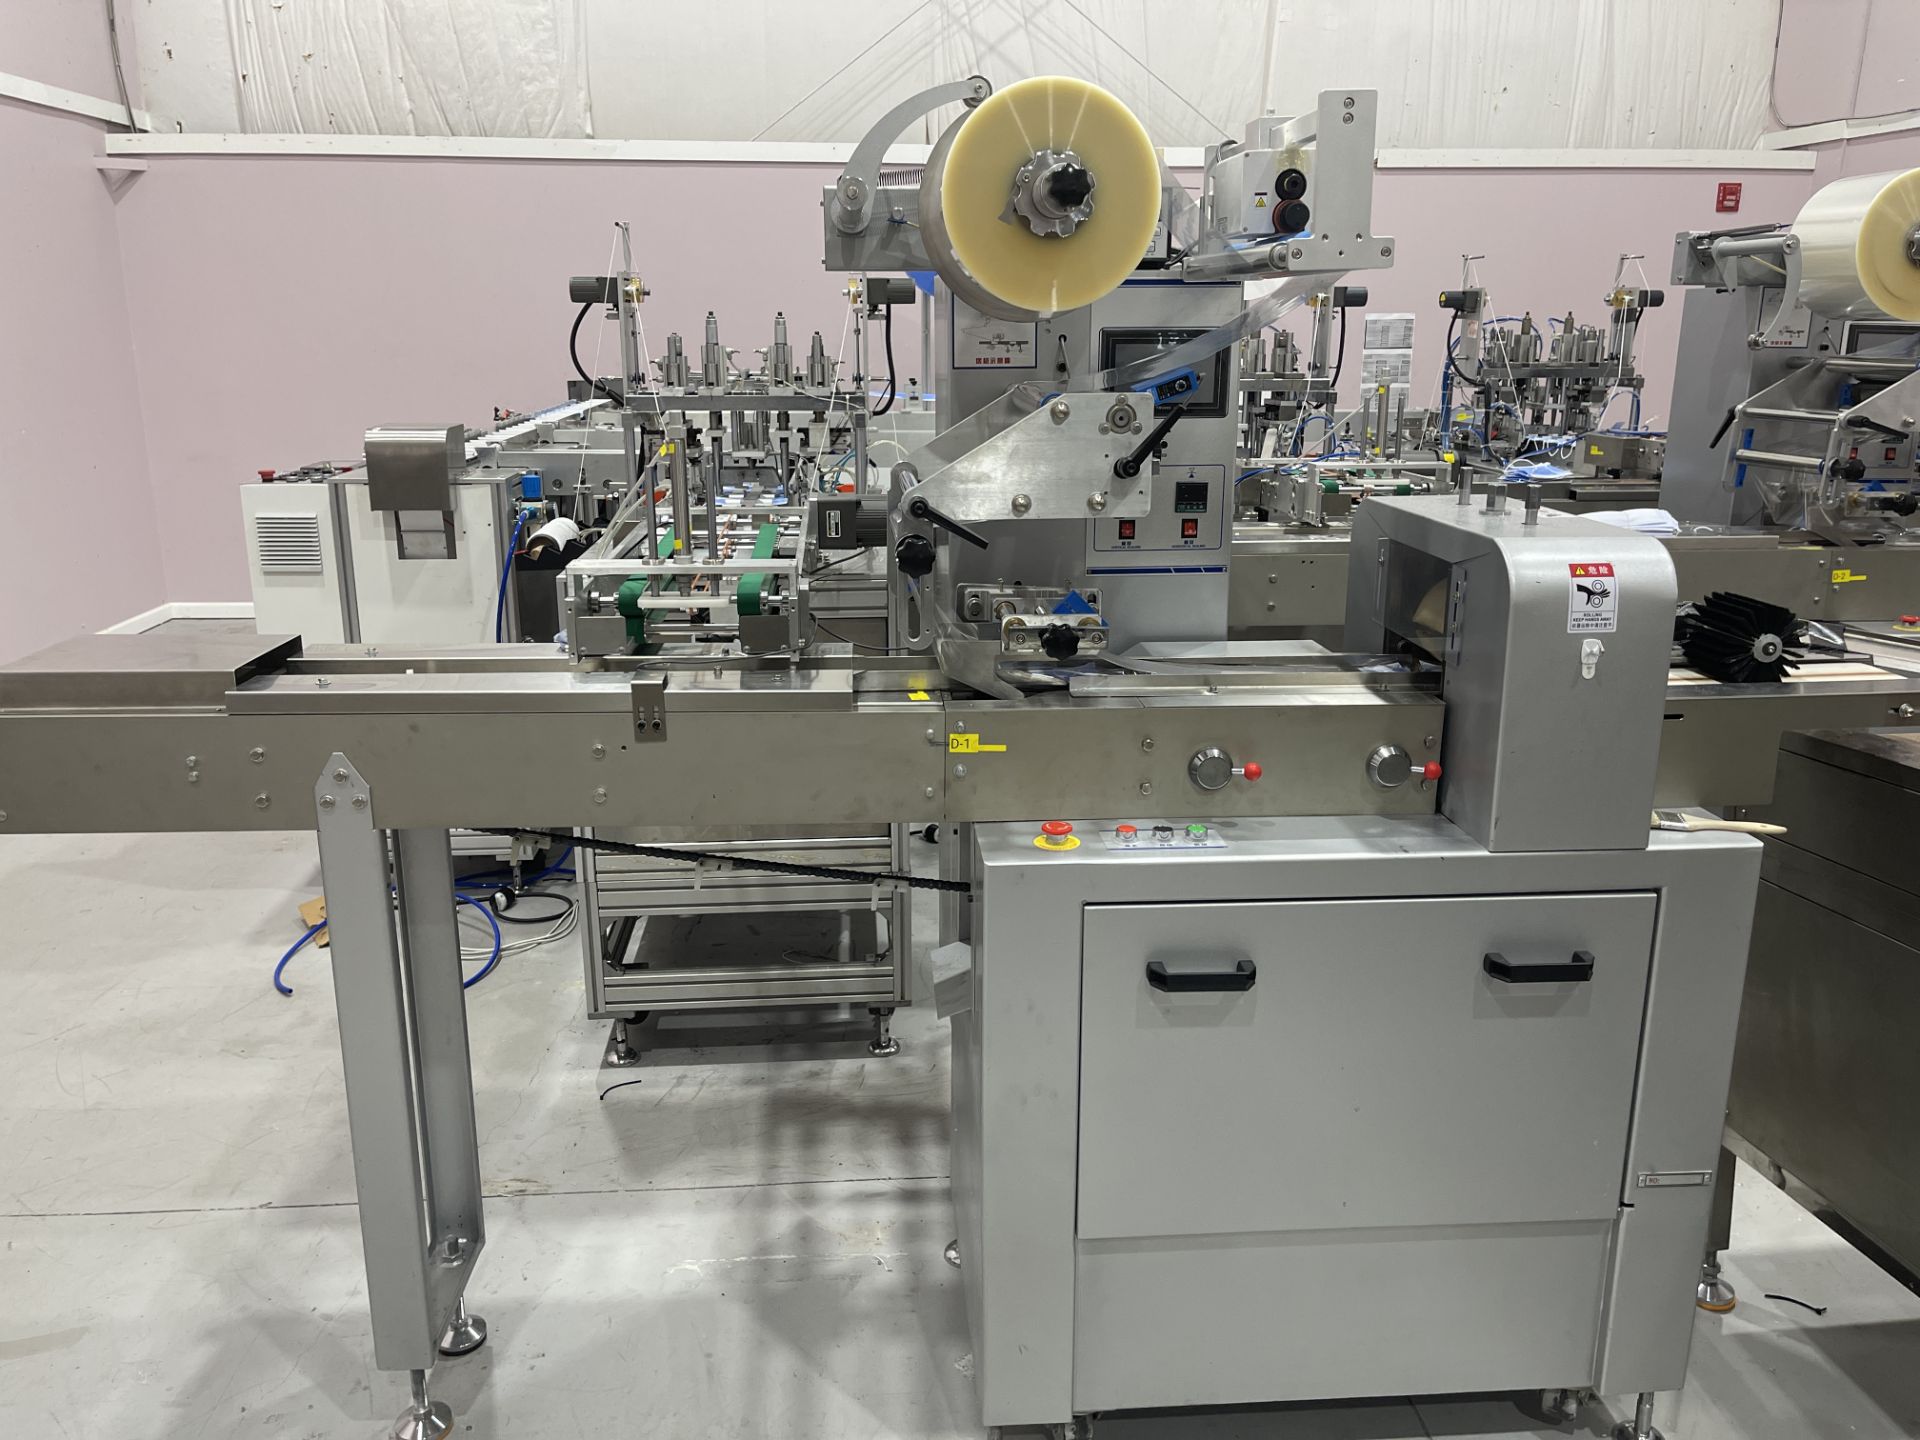 COMPLETE PACKAGE: 2020 3-Ply Disposable Medical Mask Assembly & Packaging Line Equipment, Includes: - Image 89 of 150